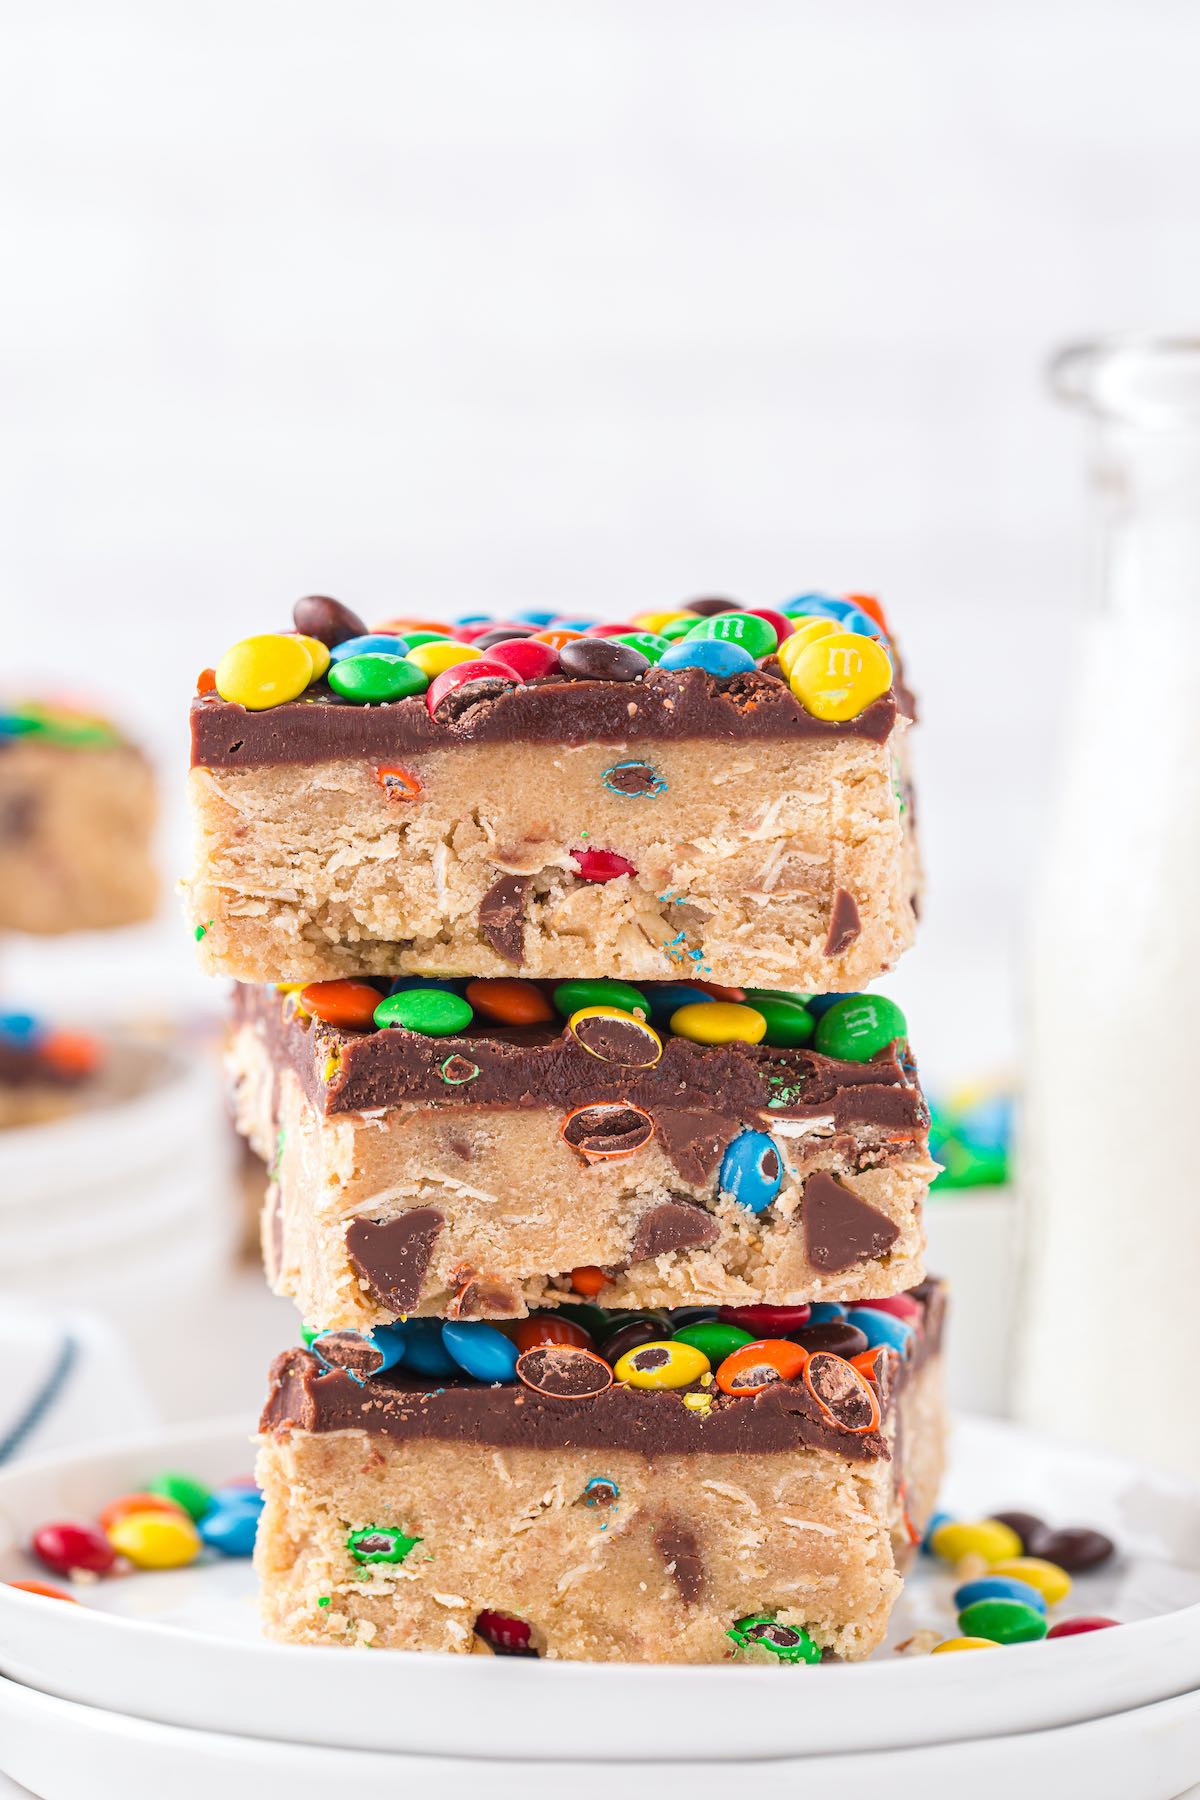 stacked cookie dough bars